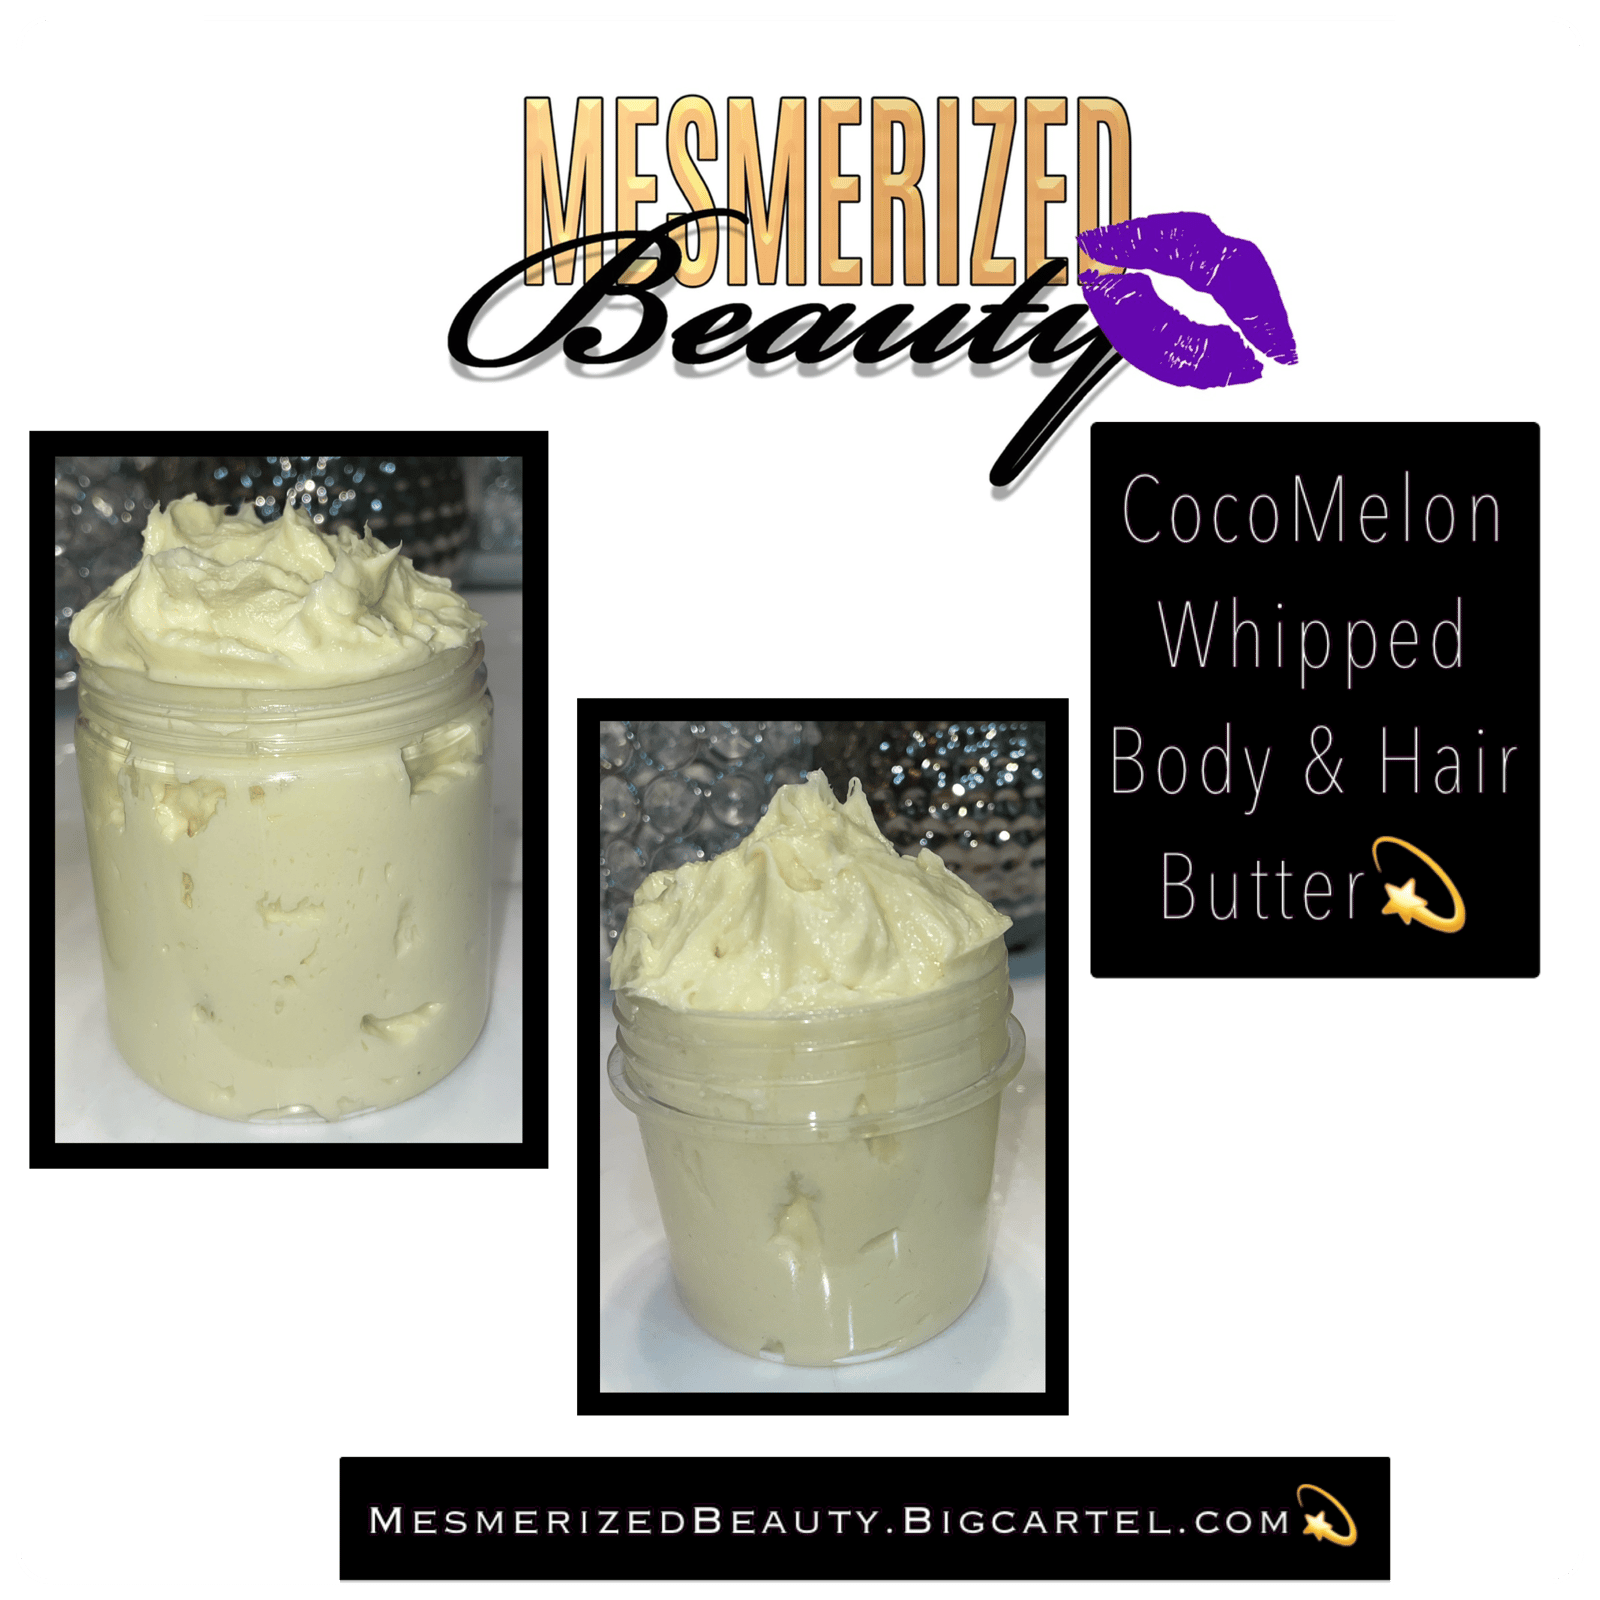 Cocomelon Whipped Body And Hair Butter Mesmerized Beauty 9417